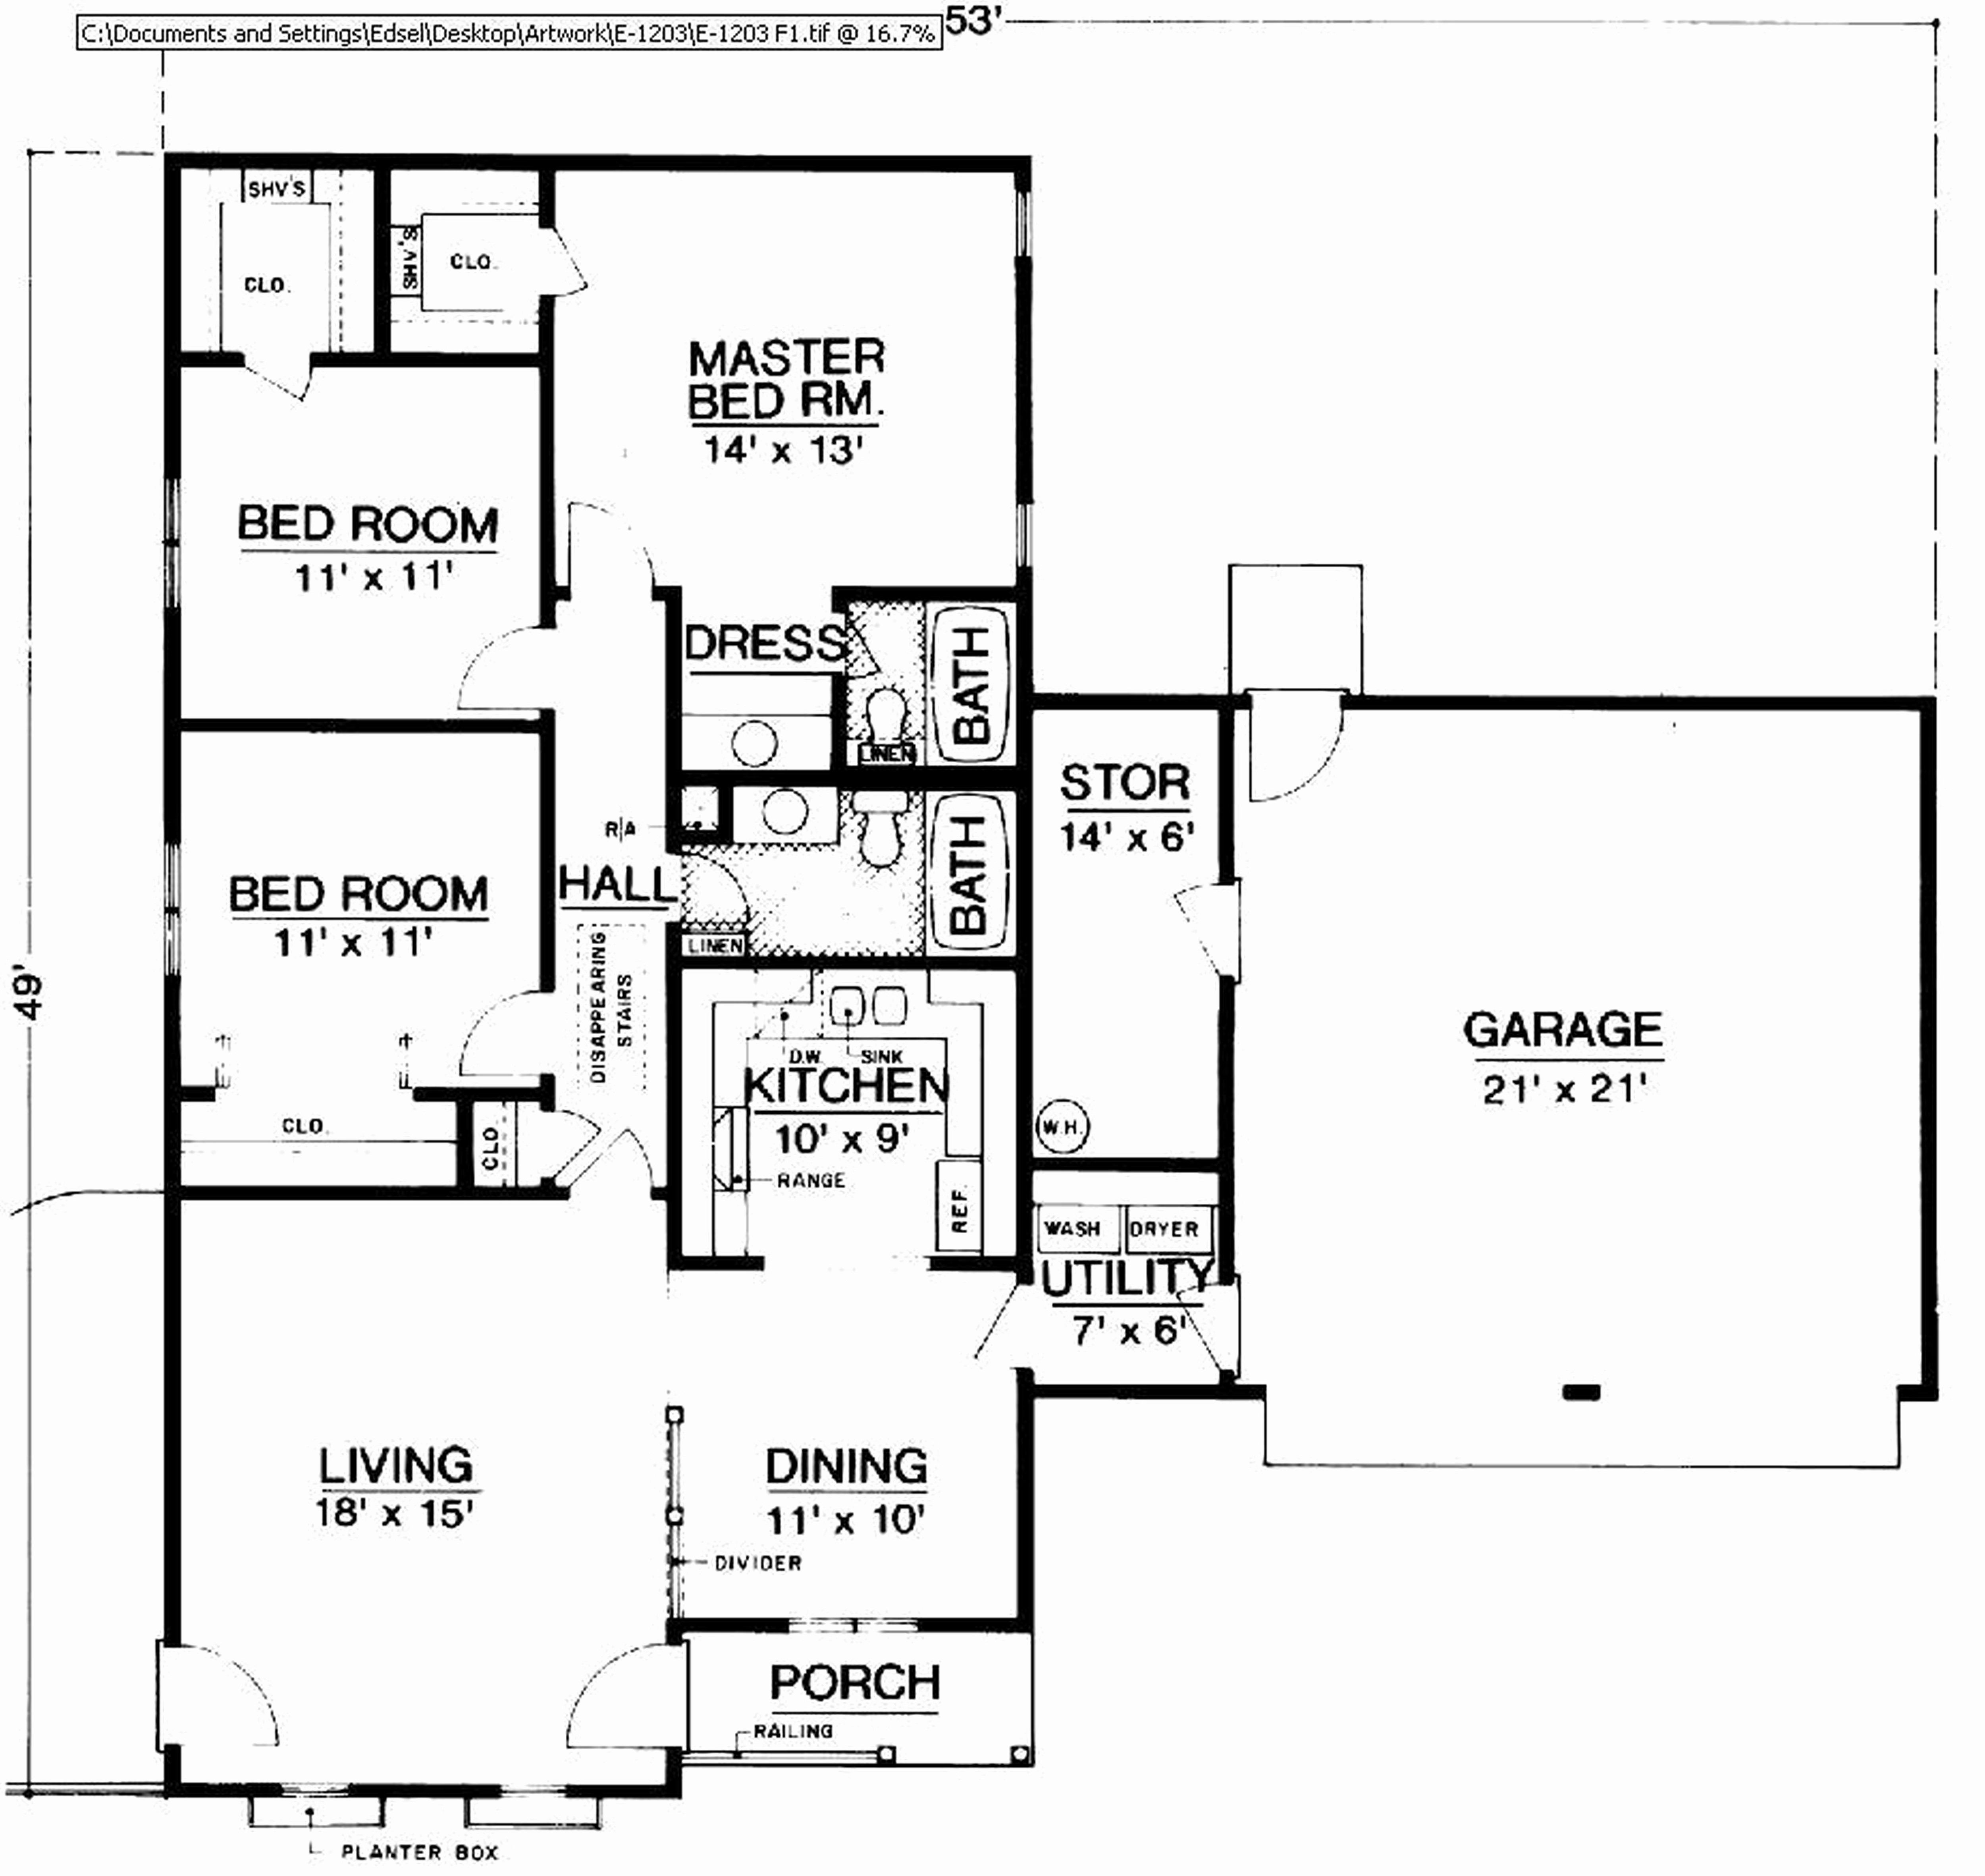 hardwood flooring knoxville of 33 picture of flooring knoxville tn wlcu within flooring knoxville tn photo of house plans with a pool unique floor plan designs floor plan flooring knoxville